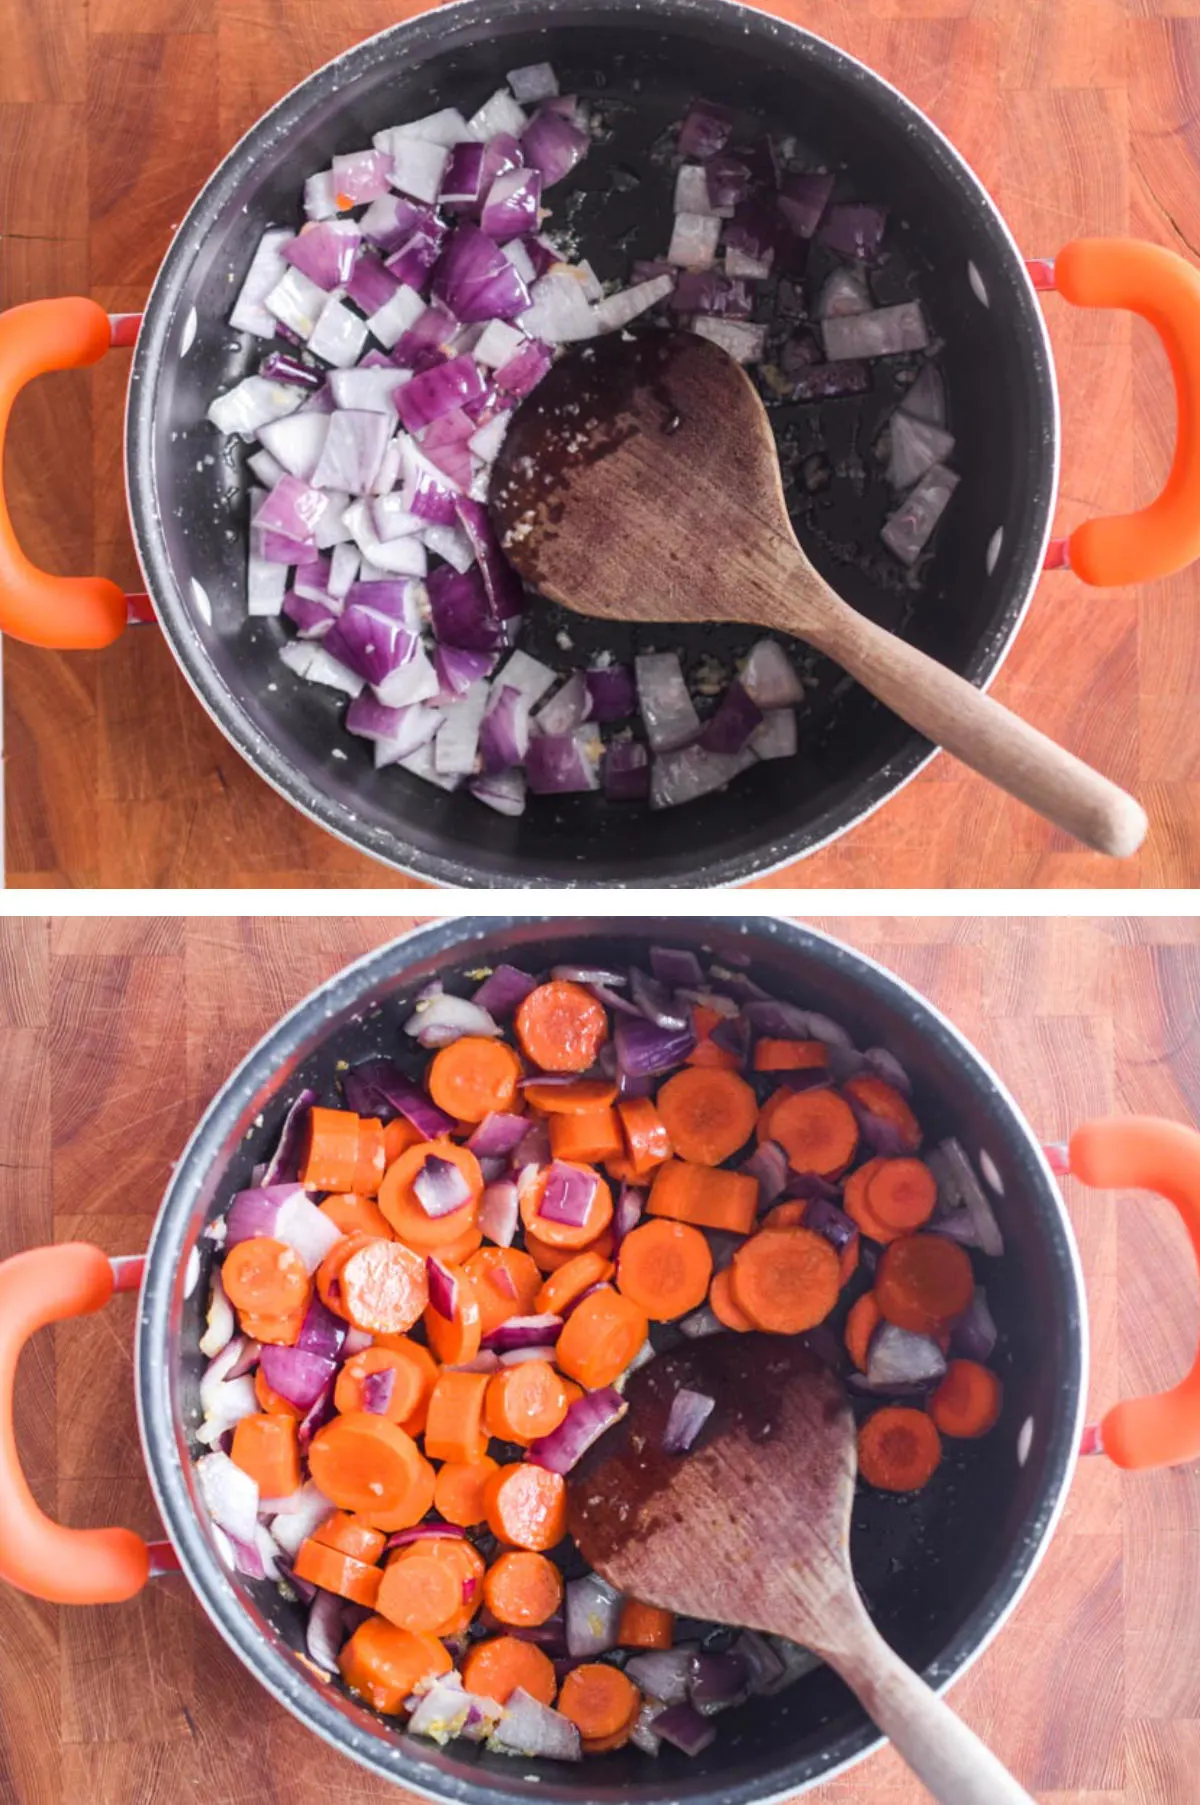 Two overhead images in one: 1. Minced garlic, chopped onion and cooking oil in a pot. 2. Carrots are added to the pot and sautéed.